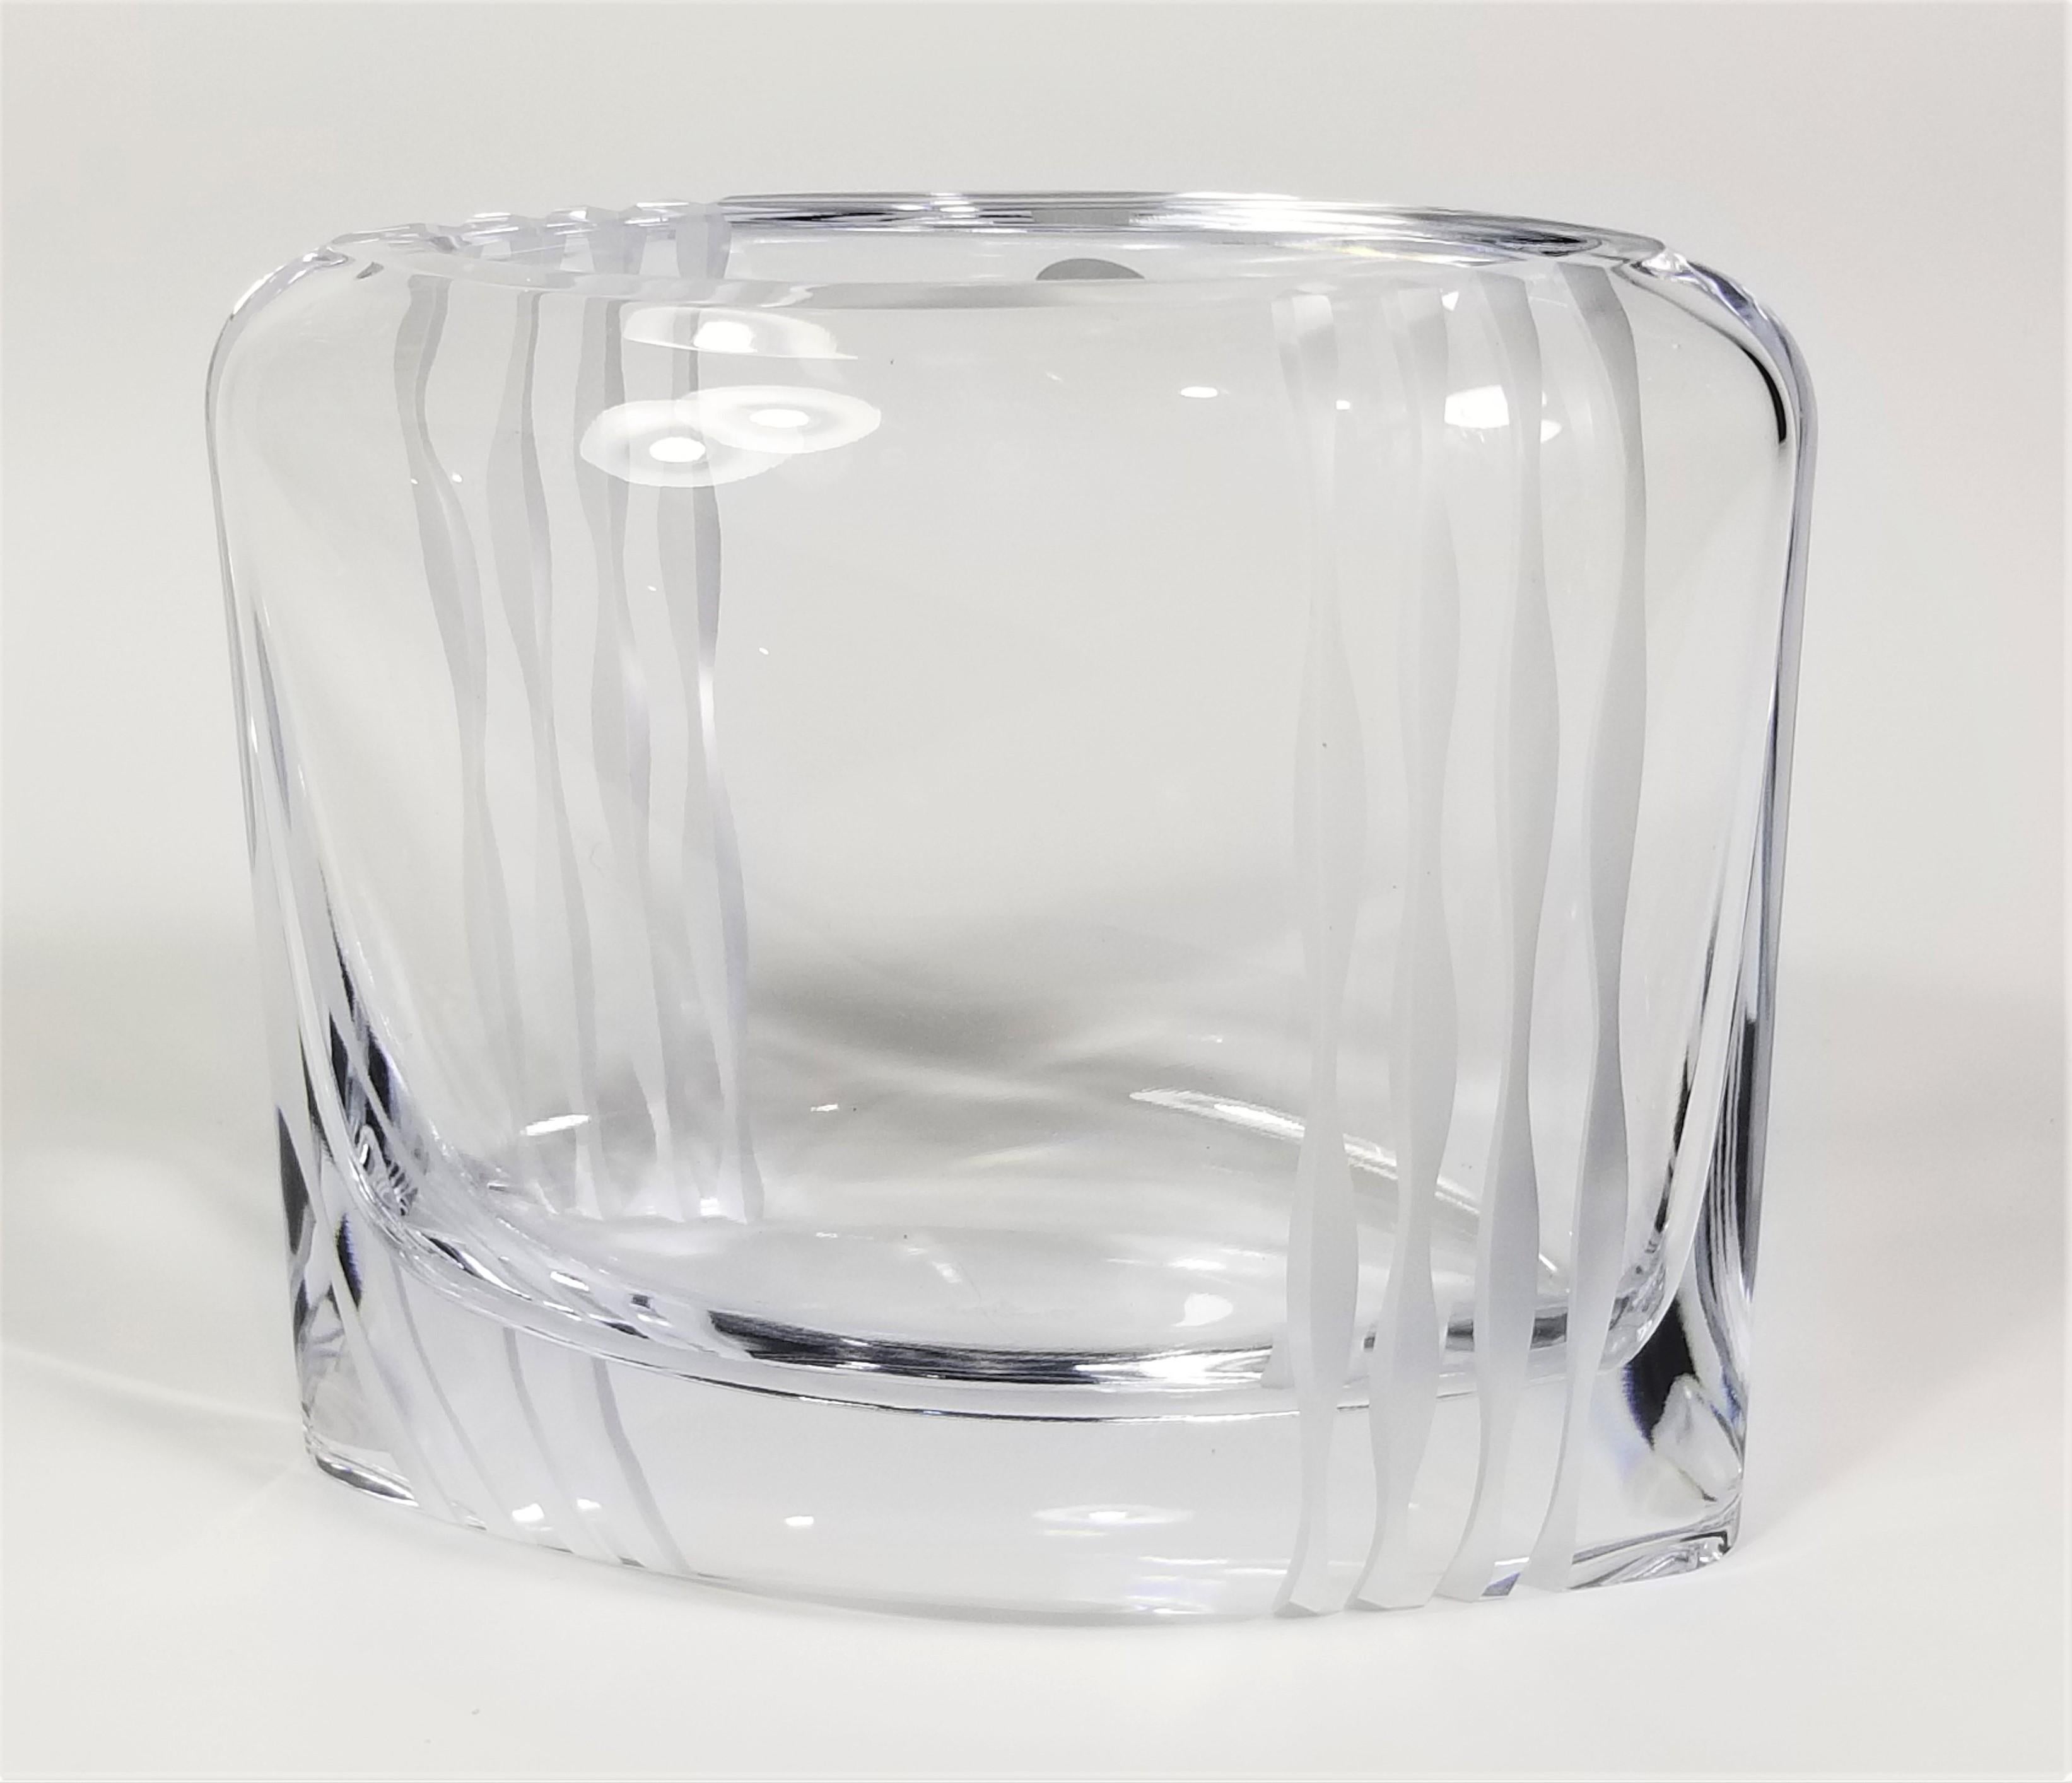 Rosenthal lead crystal vase with etching. Still retains original marking sticker. Sturdy substantial weight. Signed on bottom.